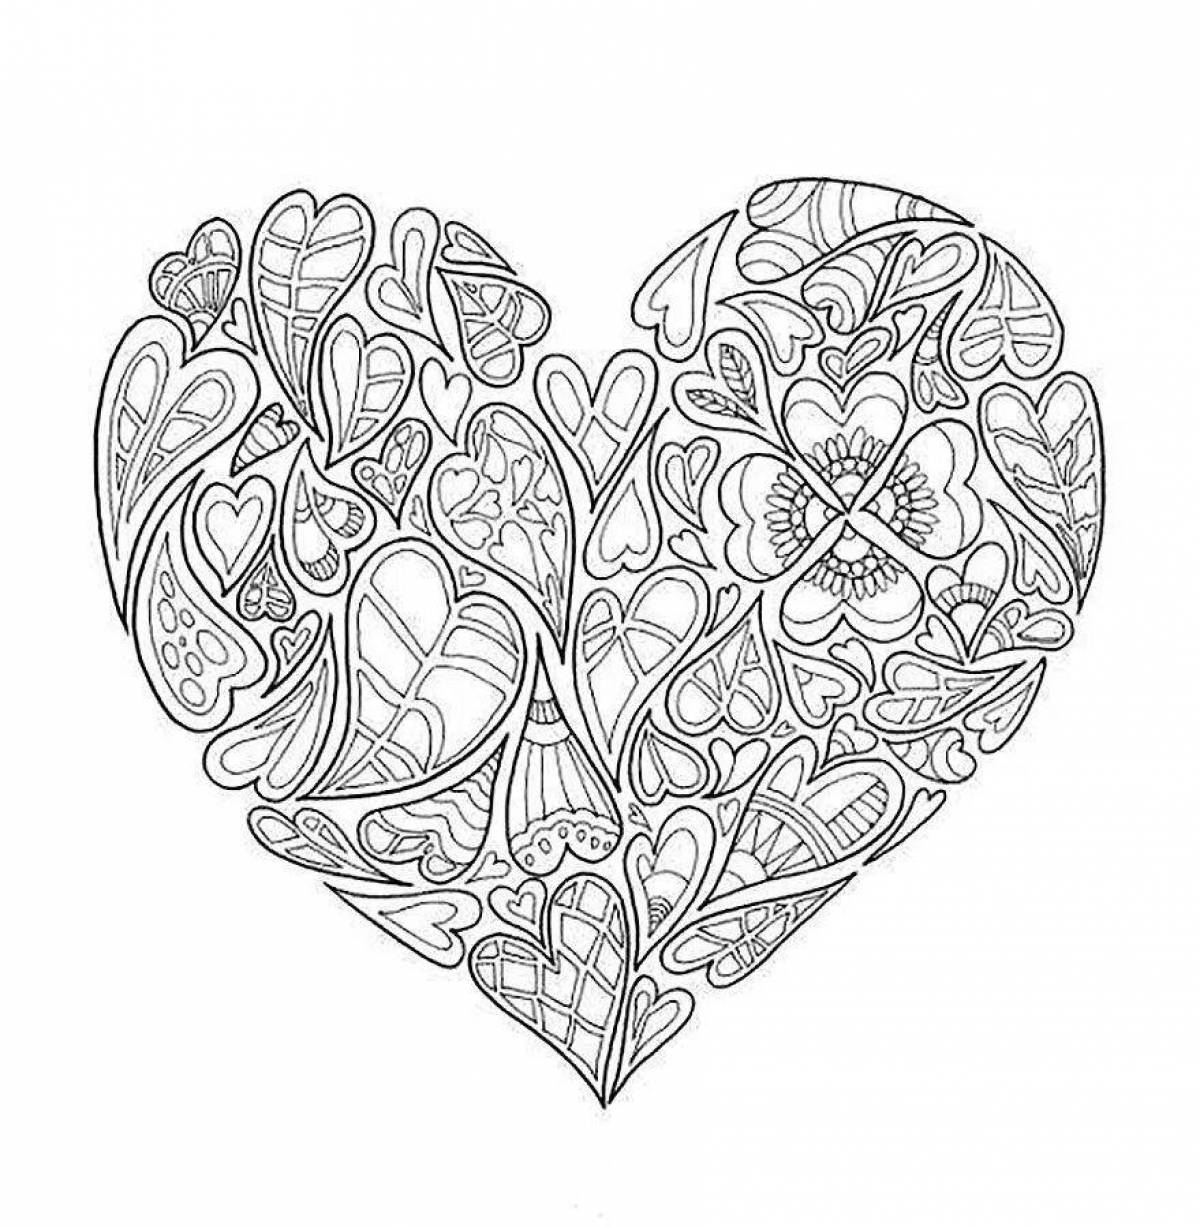 Inviting anti-stress art therapy coloring book